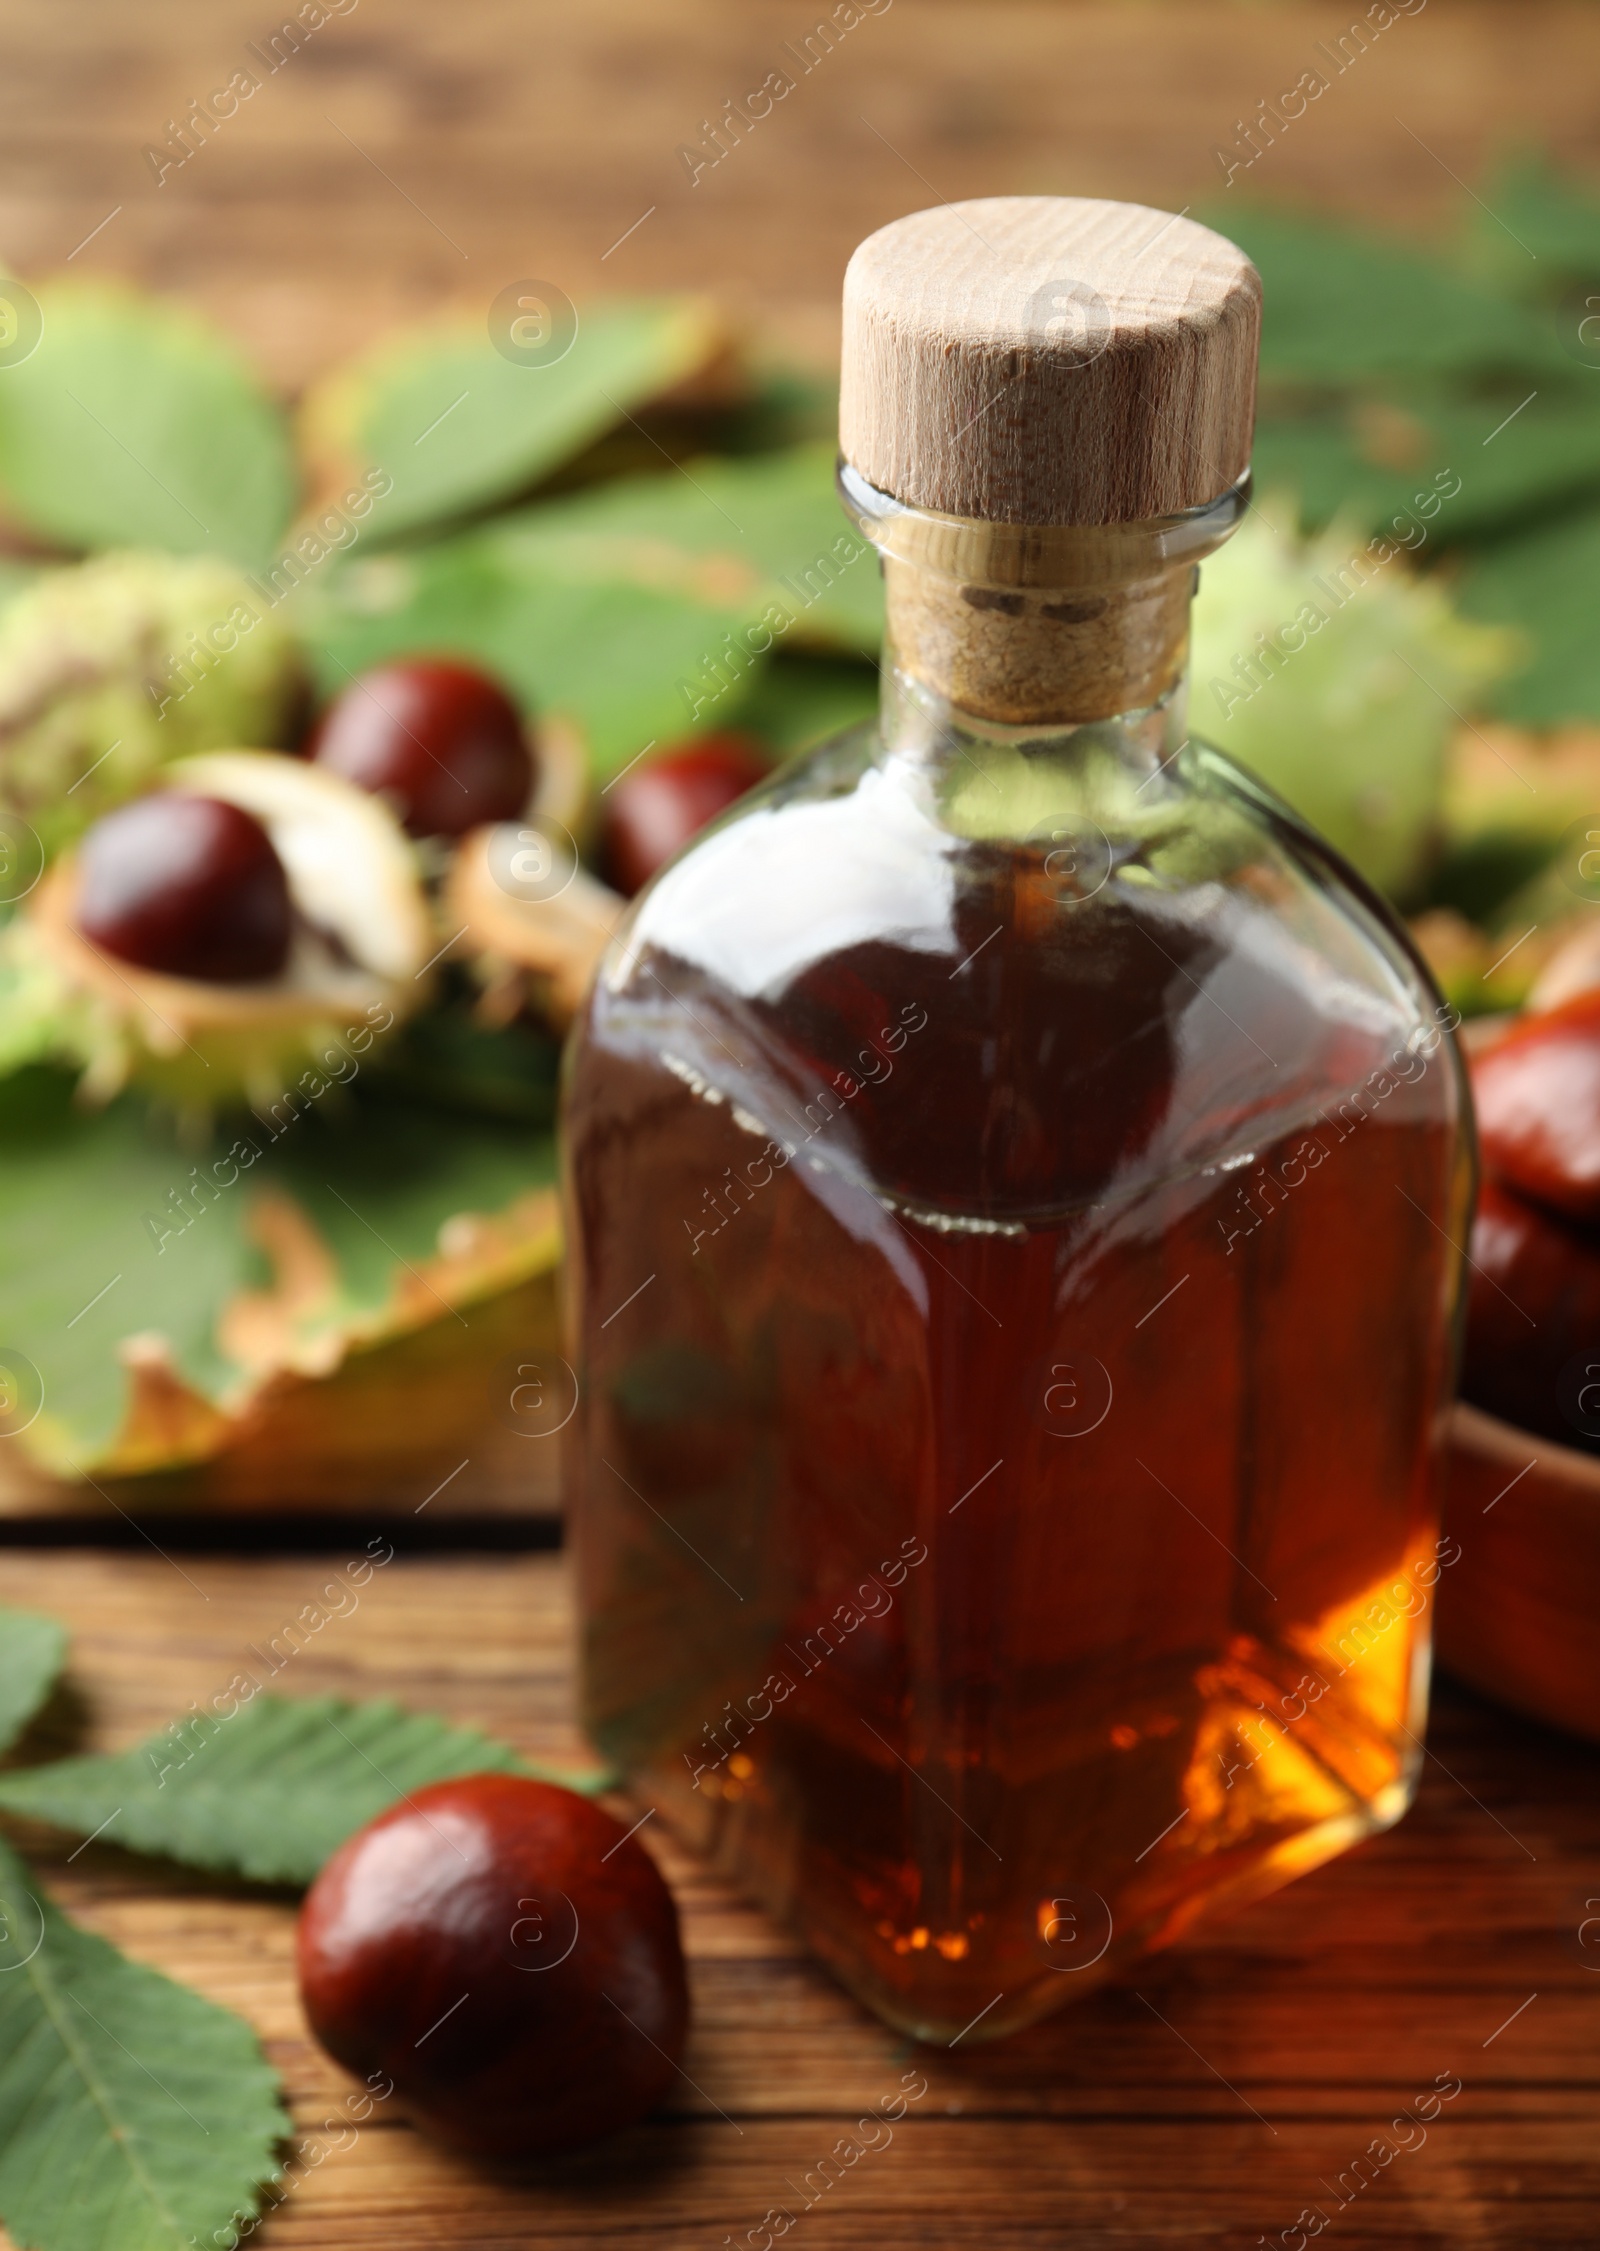 Photo of Chestnuts, leaves and bottle of essential oil on wooden table